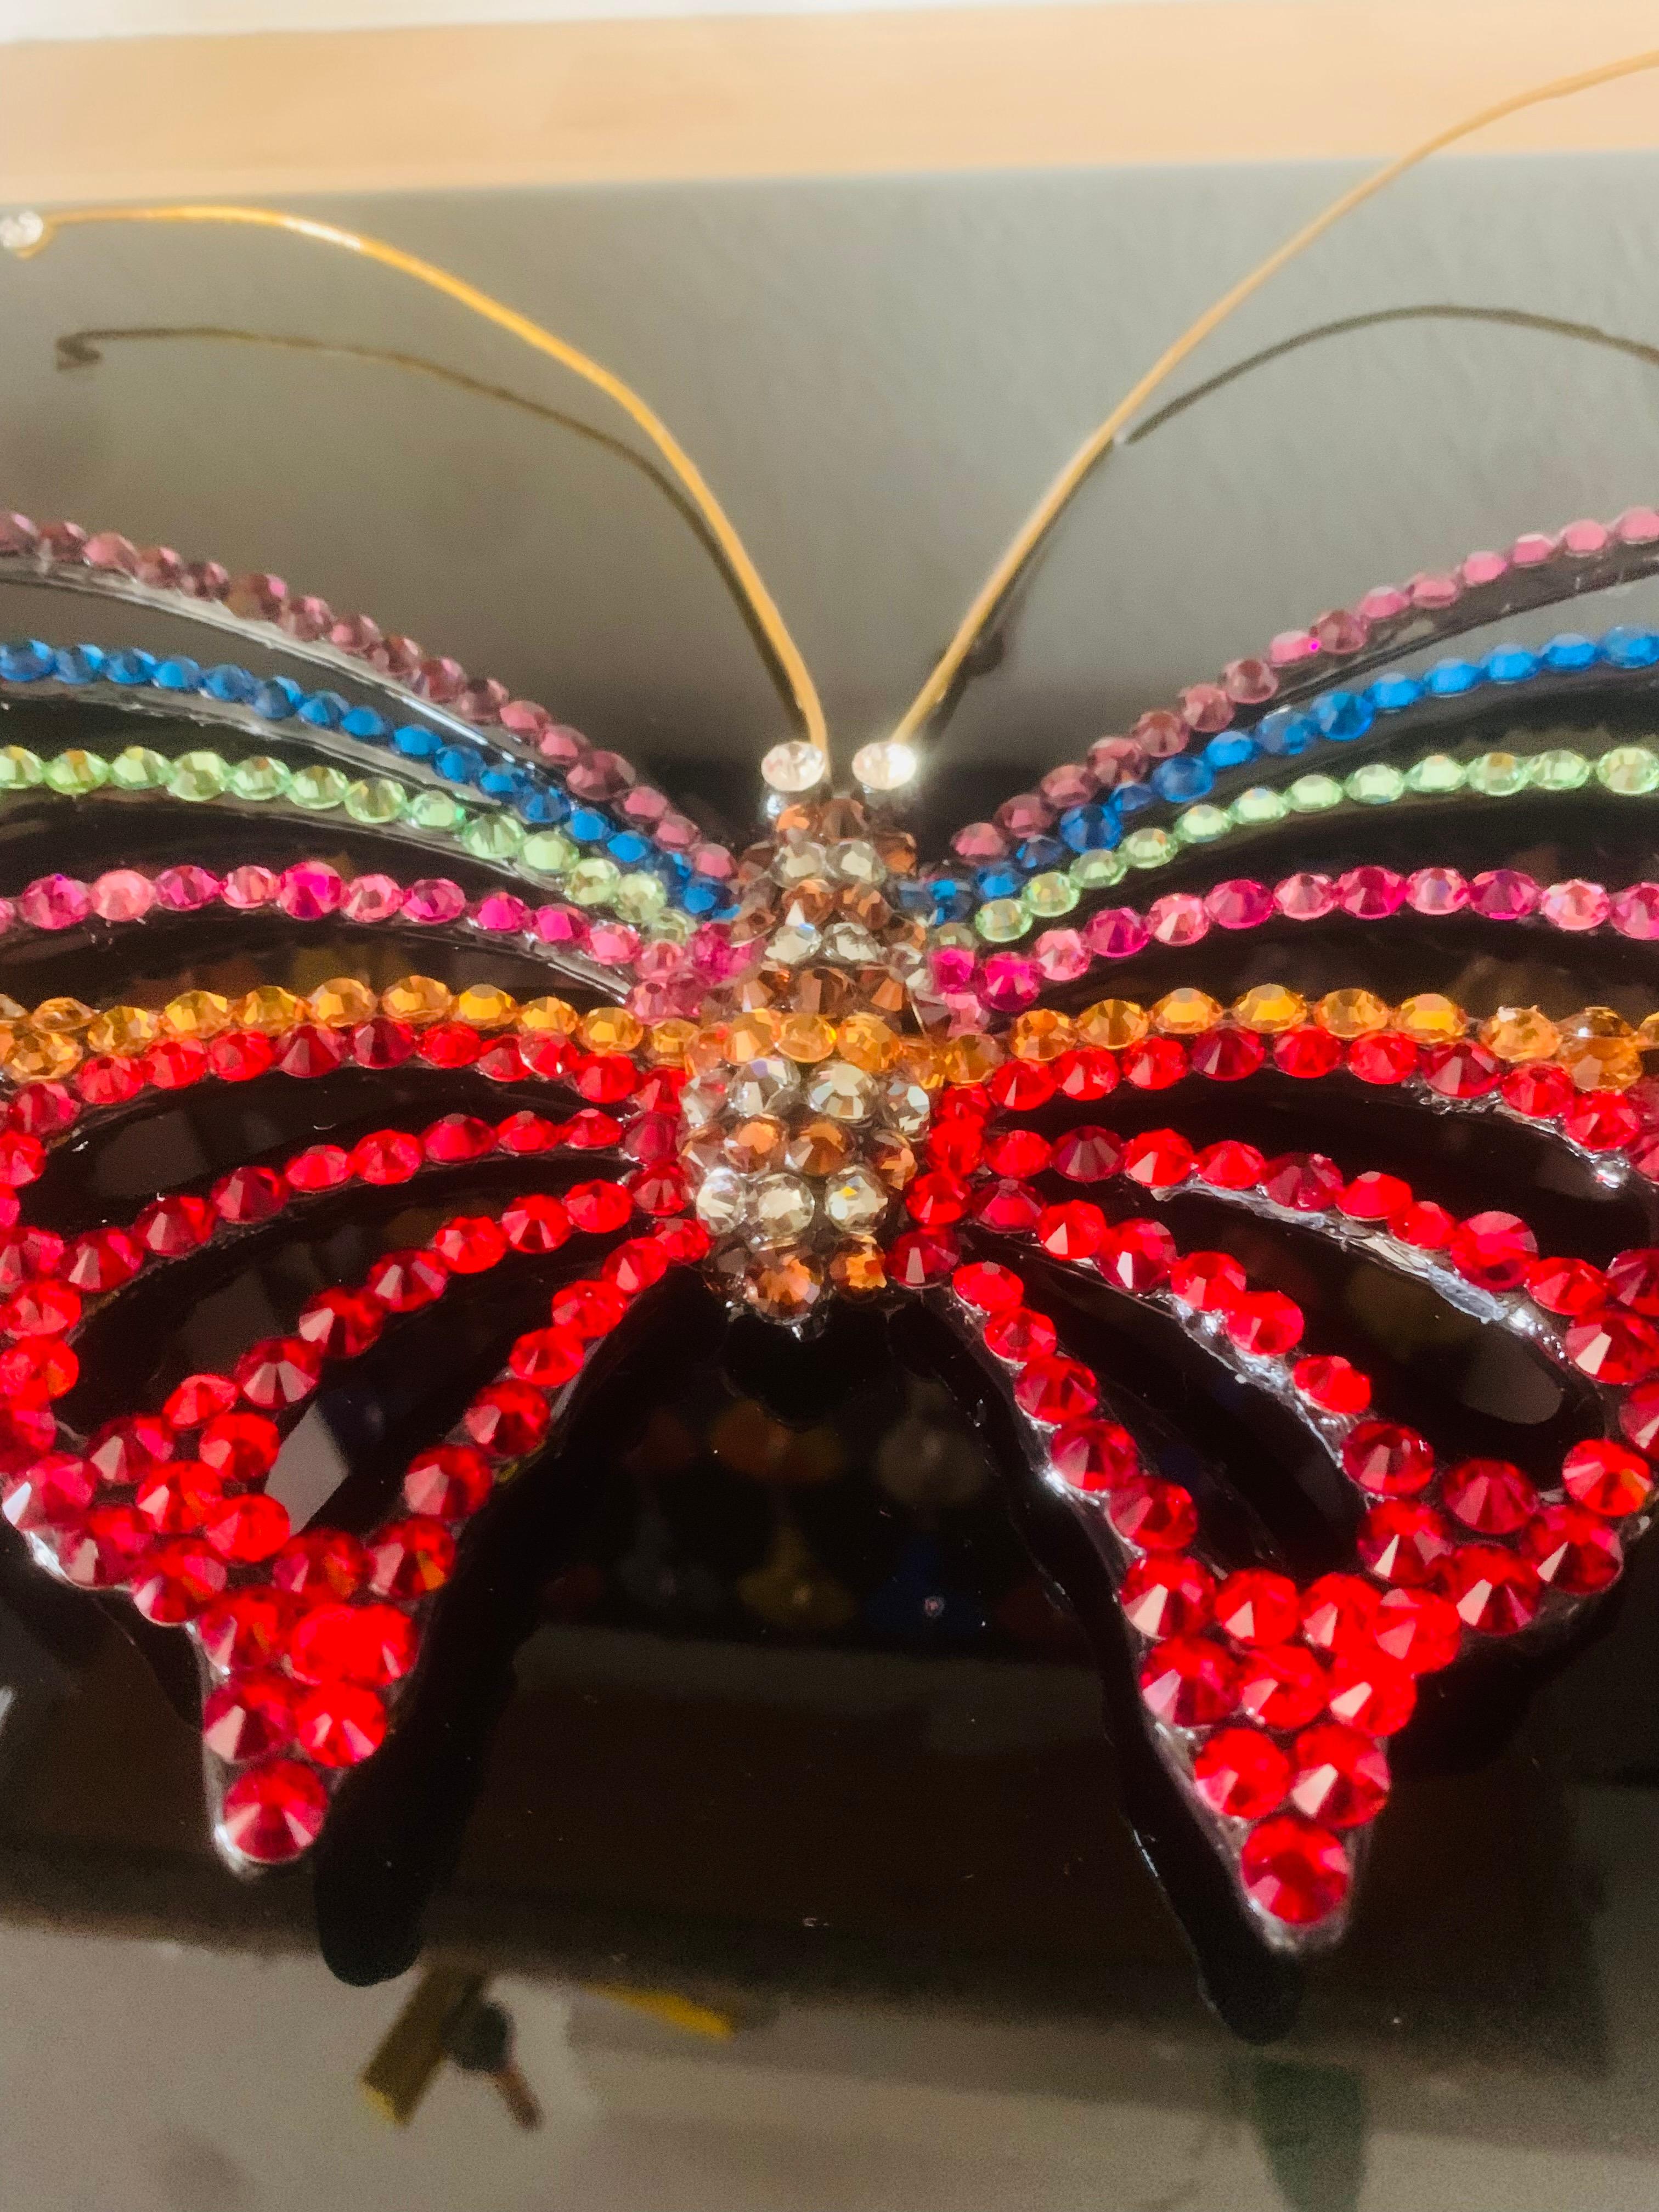 PRIDE BUTTERFLY (One of a Kind Swarovski Mixed Media Sculpture) 2